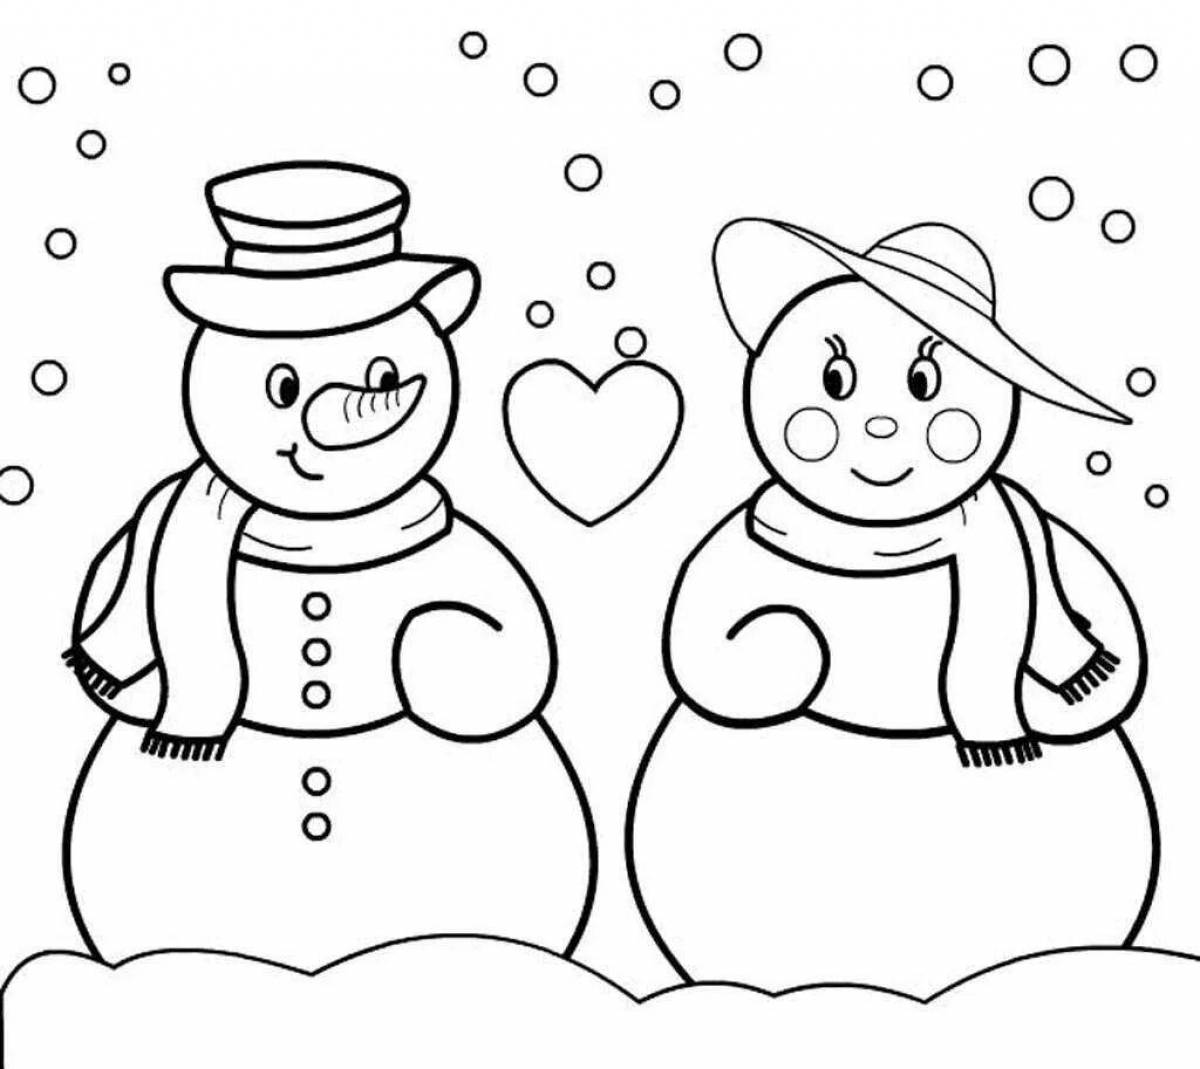 Adorable snowman coloring book for 5 year olds